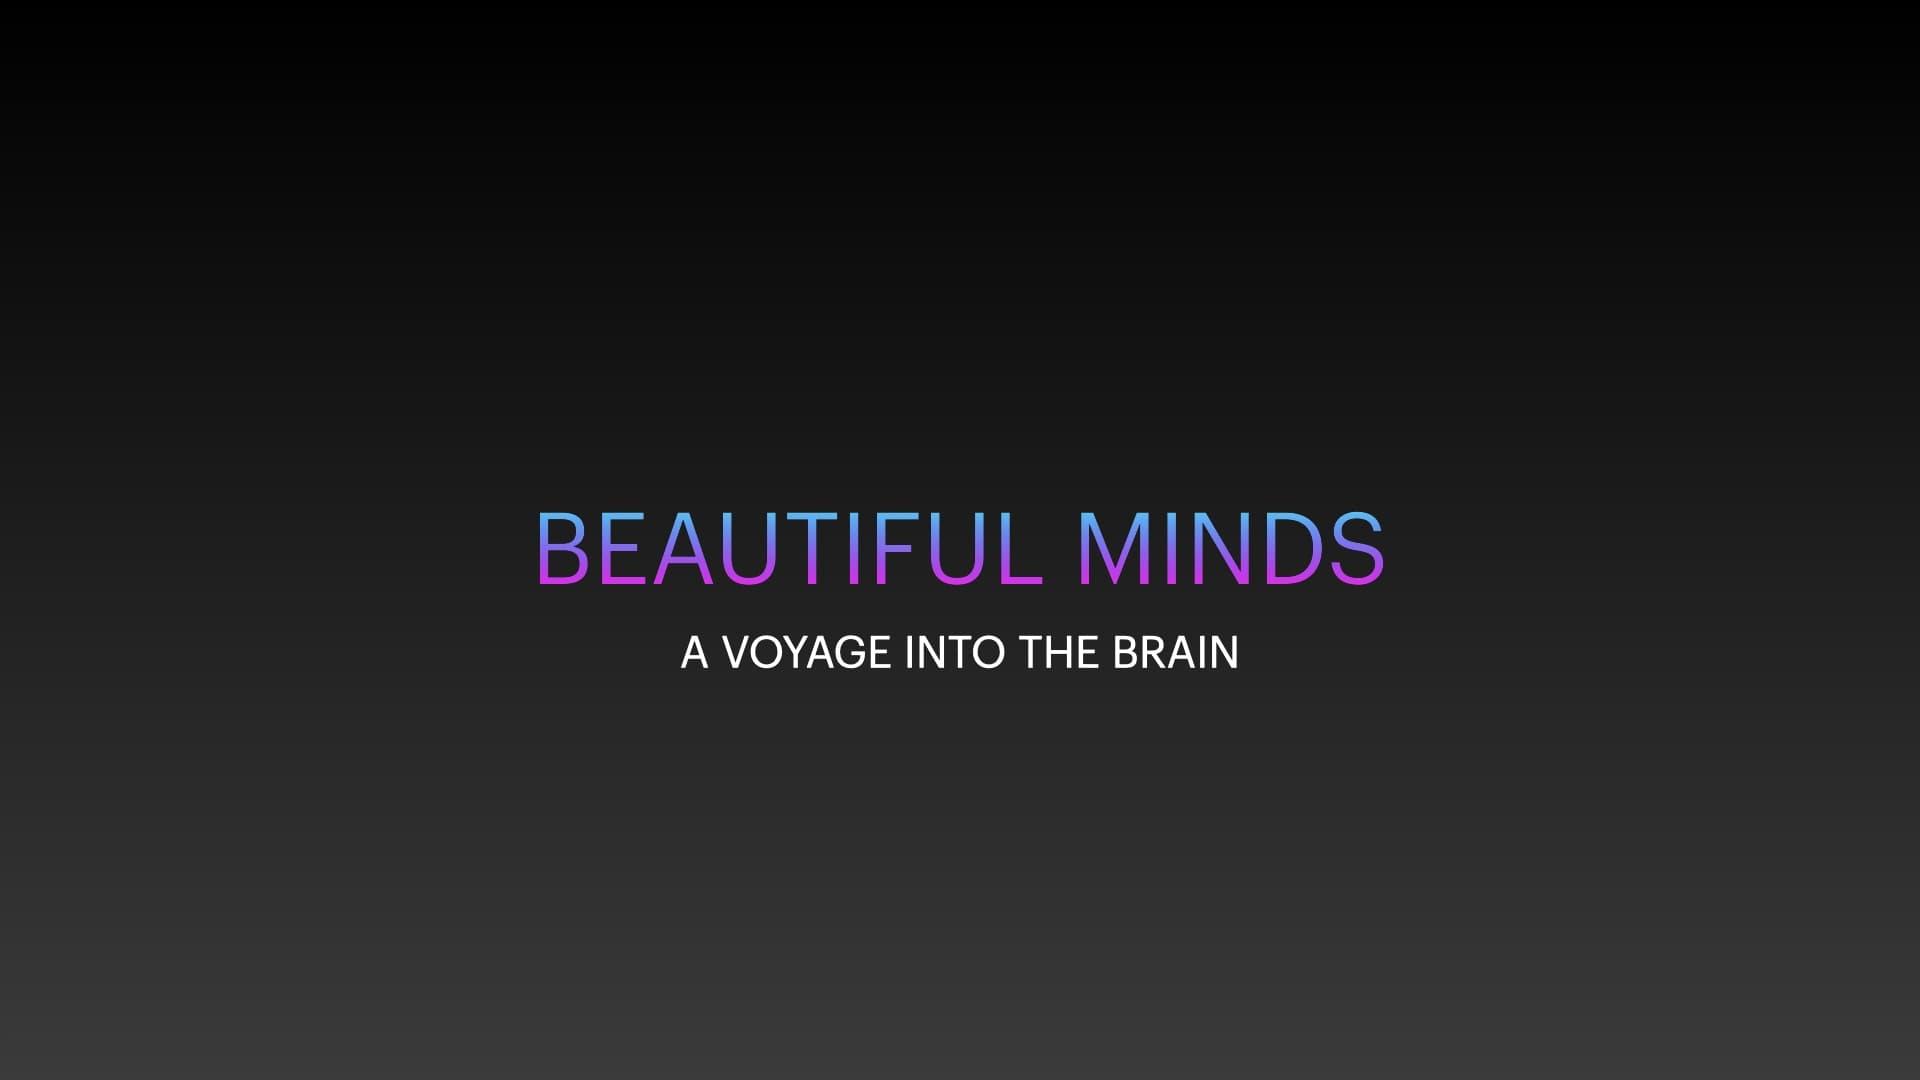 Beautiful Minds - Voyage into the Brain backdrop